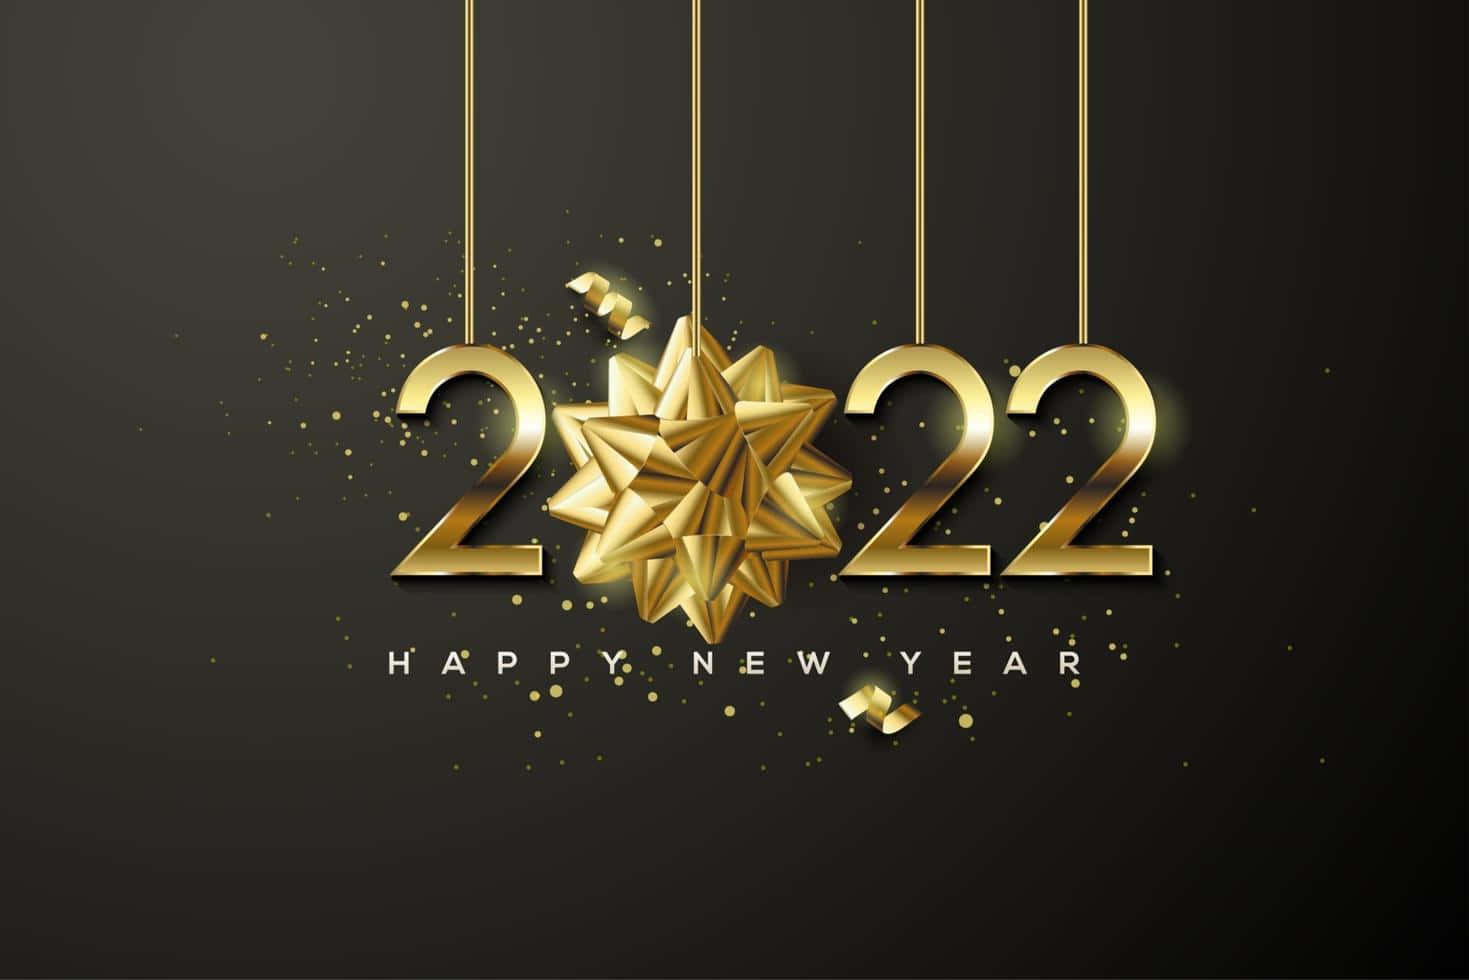 Wishes for a Happy and Fulfilling New Year 2022